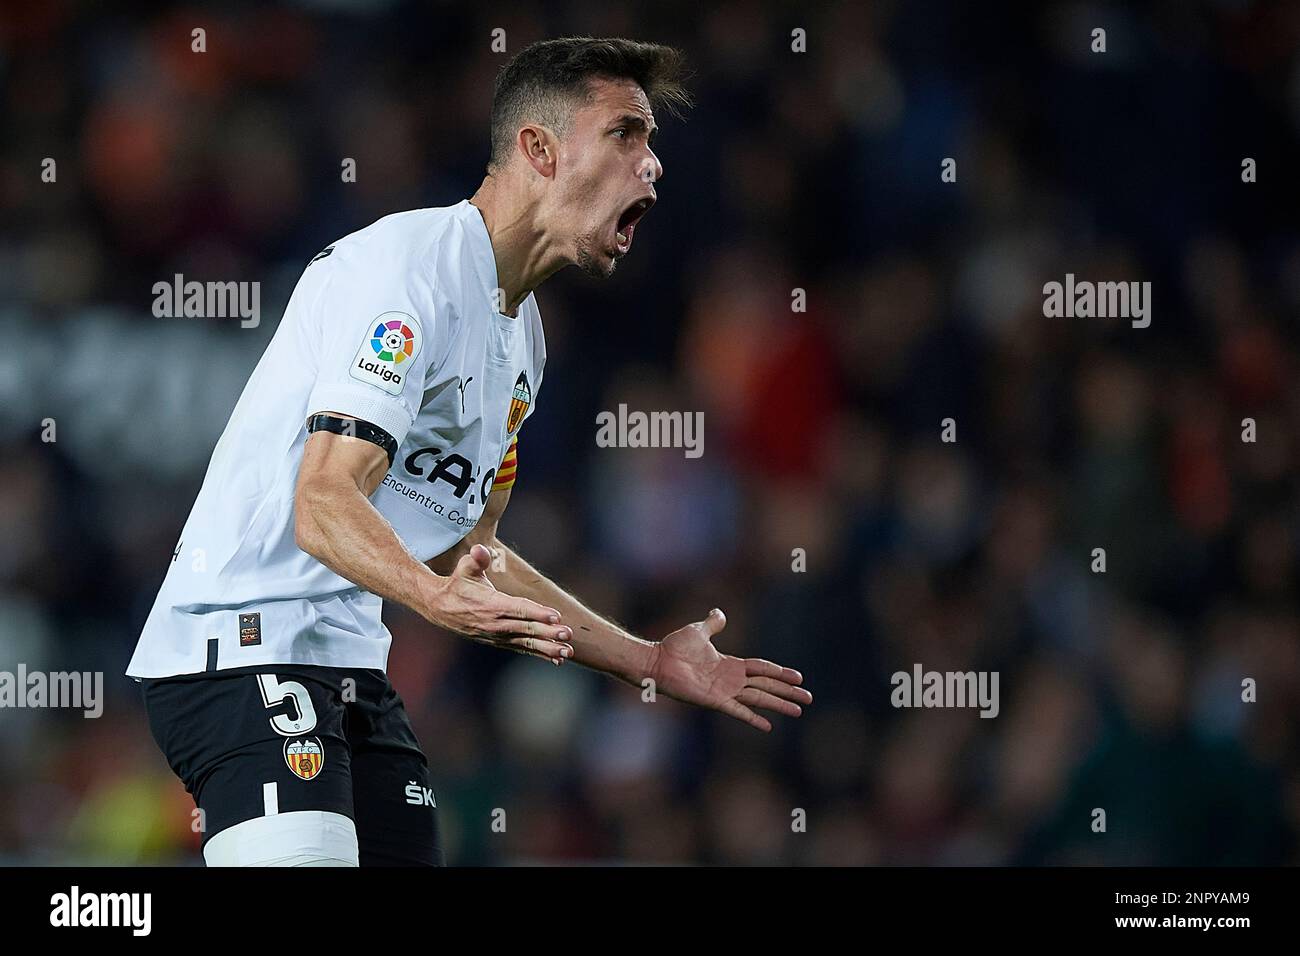 Gabriel Paulista of Valencia CF  during the La Liga match between Valencia and Real Sociedad played at Mestalla Stadium on February 25 in Valencia, Spain. (Photo by PRESSIN) Stock Photo